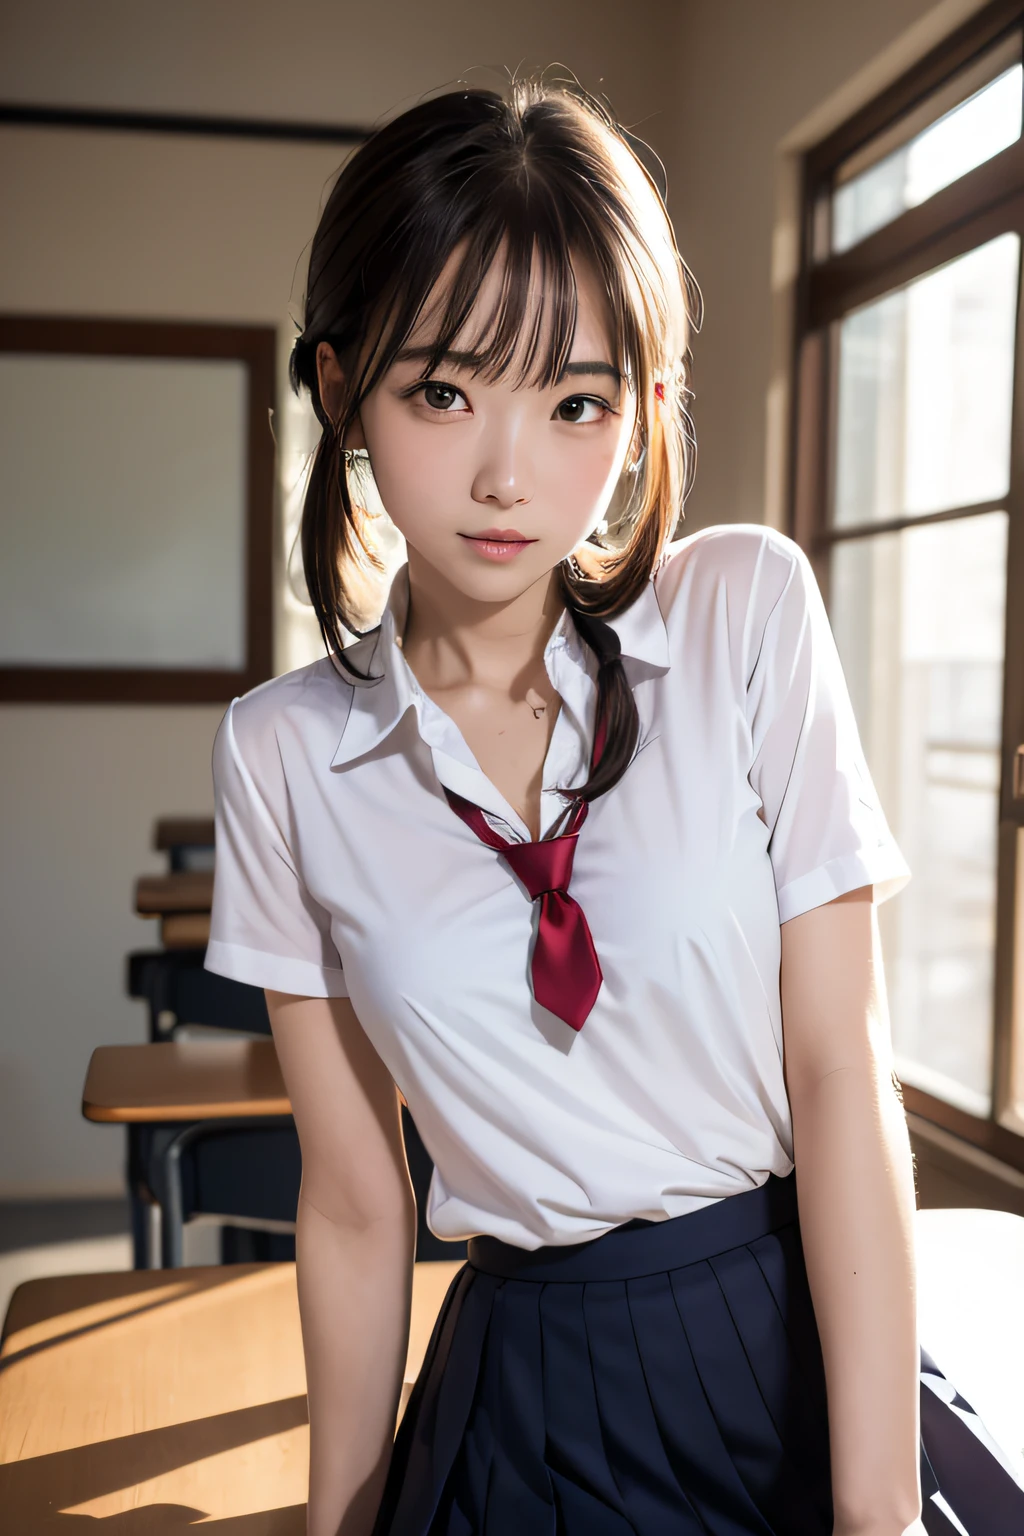 (masutepiece, Best Quality:1.2), 8K, 18year old, 85 mm, Official art, Raw photo, absurderes, White dress shirts, Pretty Face, close up, Upper body, violaceaess, gardeniass, Beautiful Girl, , (Navy pleated skirt:1.1), Cinch West, thighs thighs thighs thighs, Short sleeve, ‎Classroom, Gravure Pose, Looking at Viewer, No makeup,ssmile, Film grain, chromatic abberation, Sharp Focus, face lights, clear lighting, Teen, Detailed face, Bokeh background, (dark red necktie:1.1)、medium breasts⁩、Skinny face